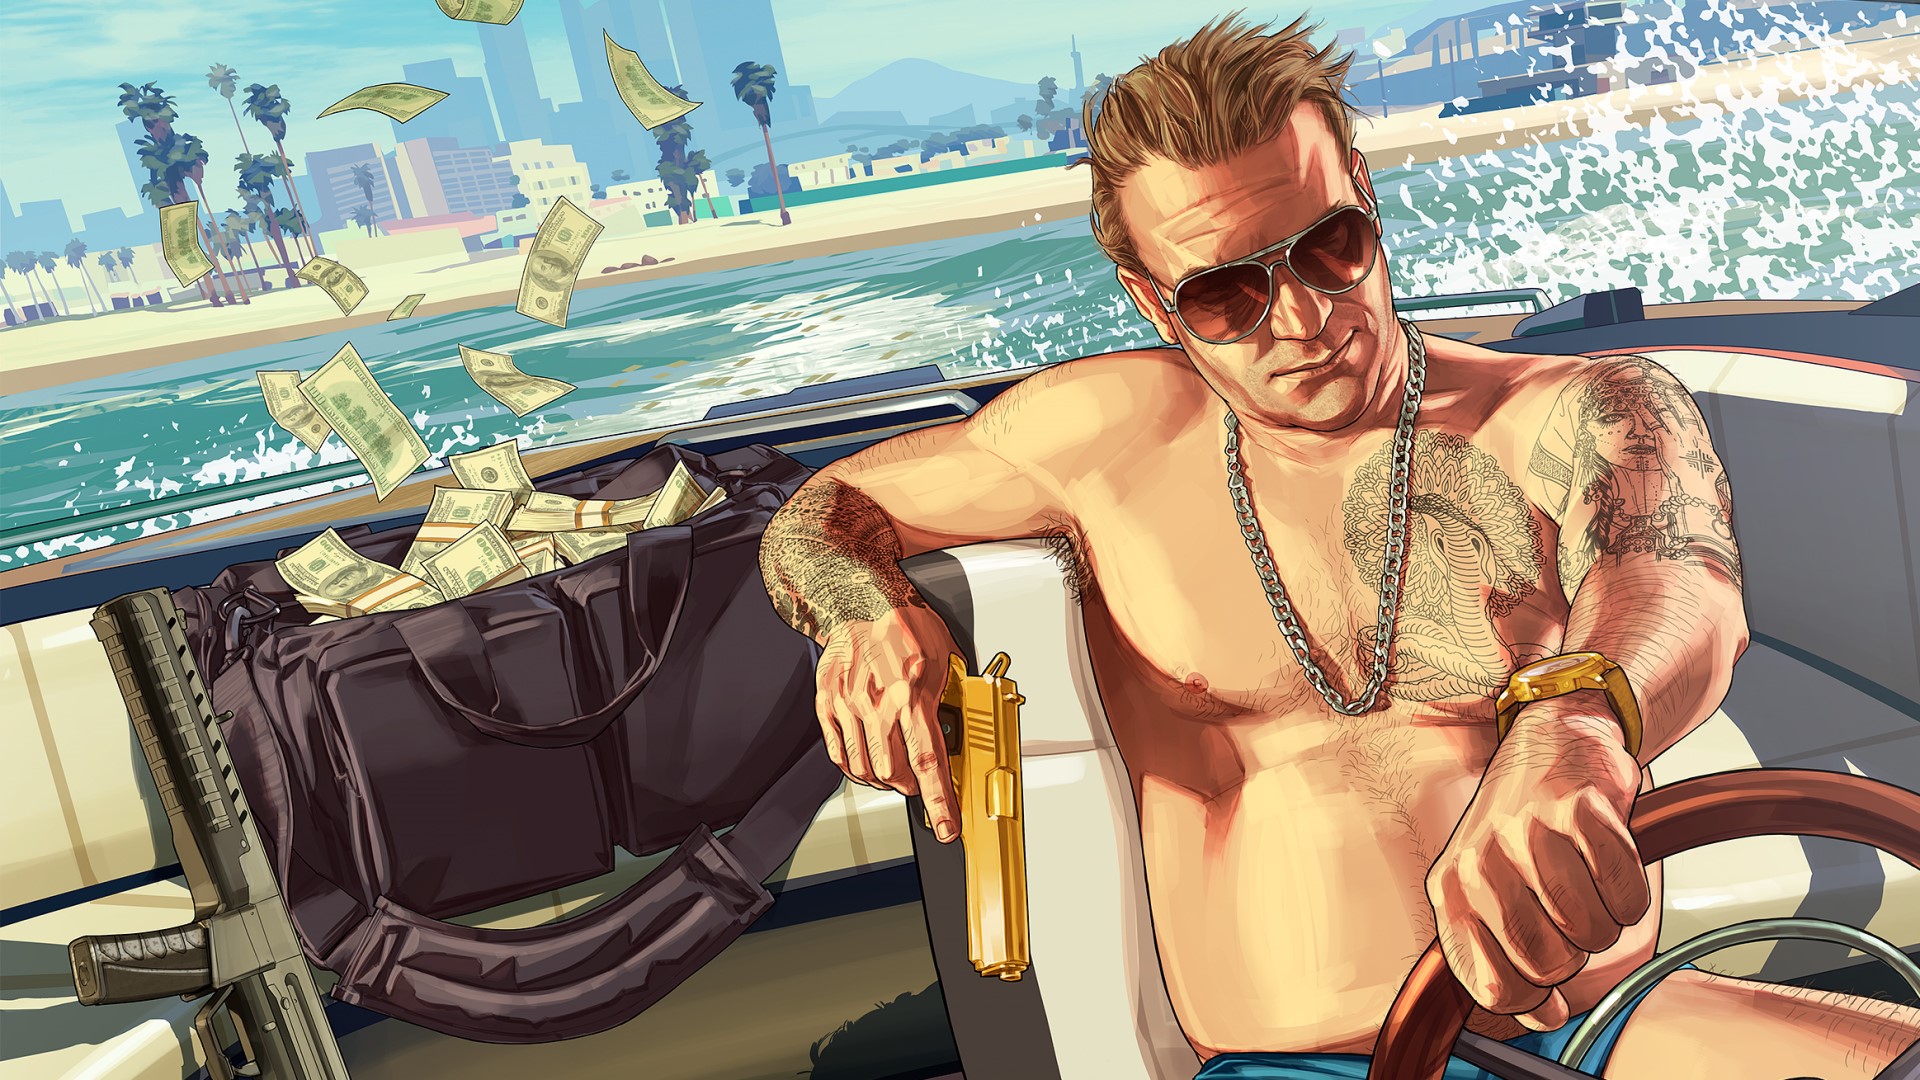 A man holding a gun drives a boat as money flies out the back in GTA Online